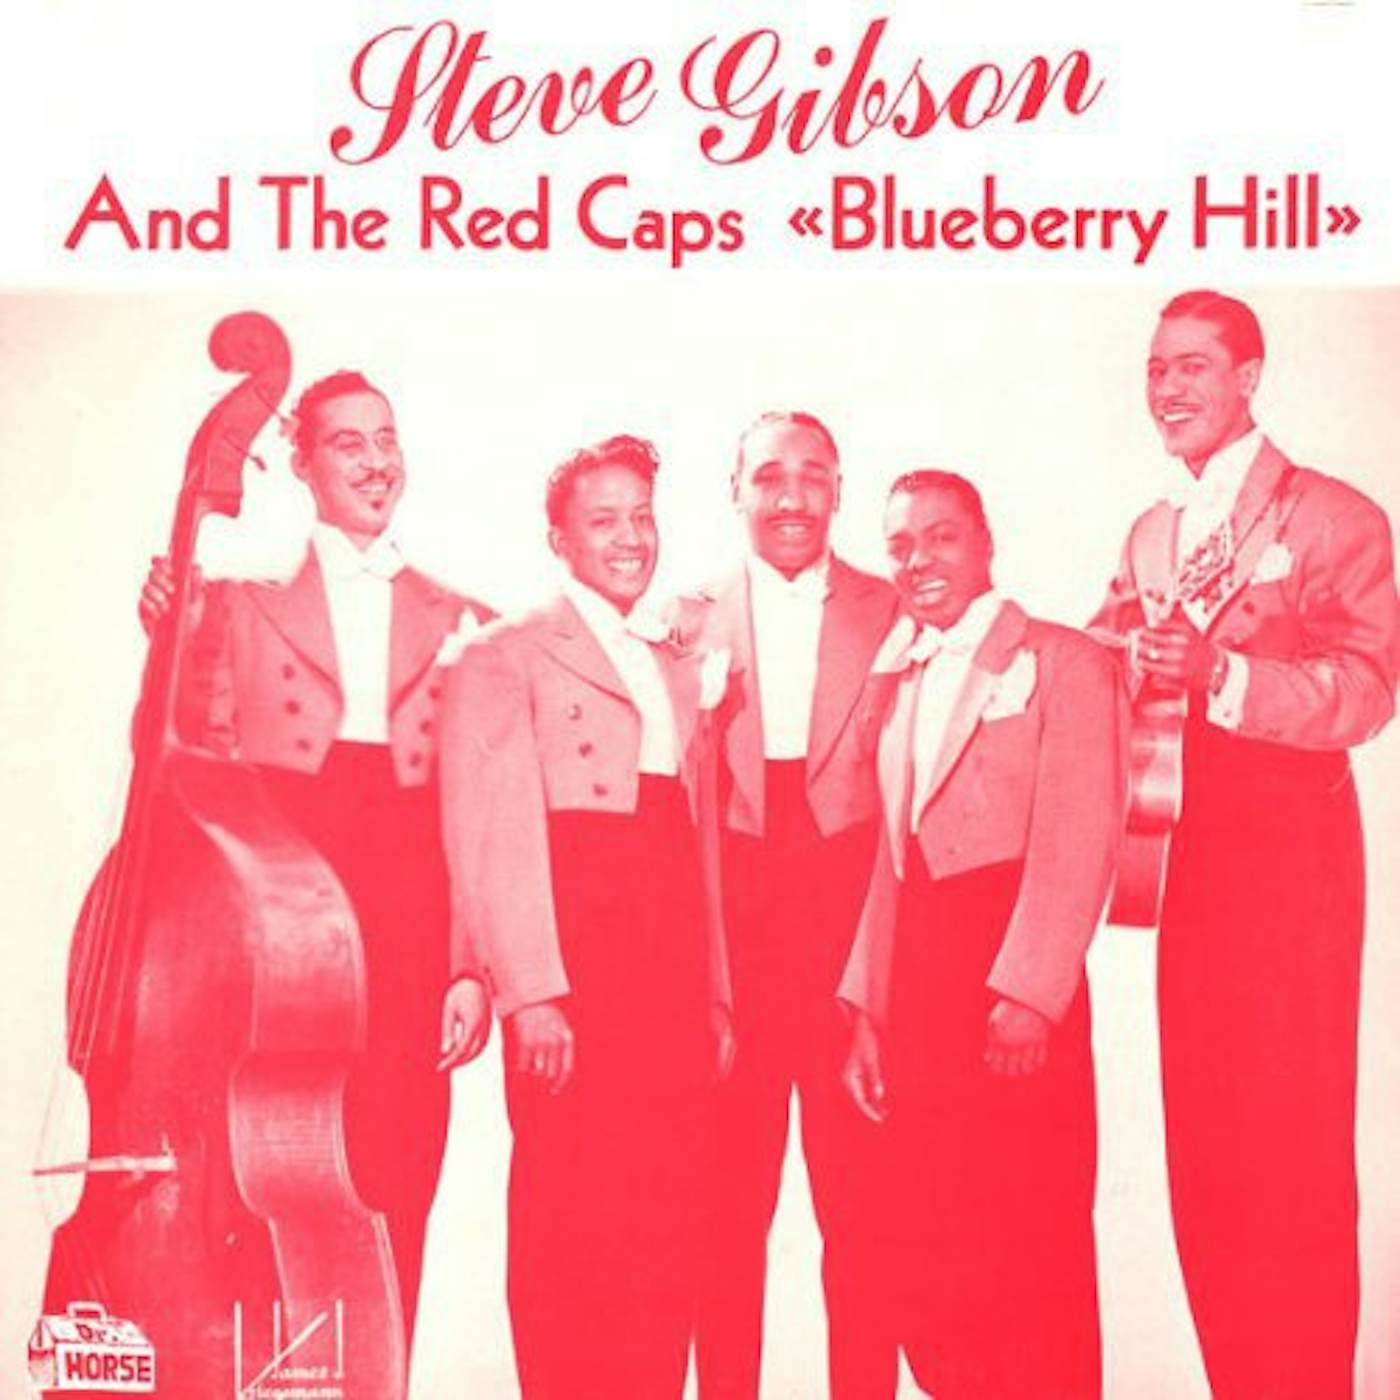 Steve Gibson (And The Red Caps) BLUEBERRY HILL Vinyl Record